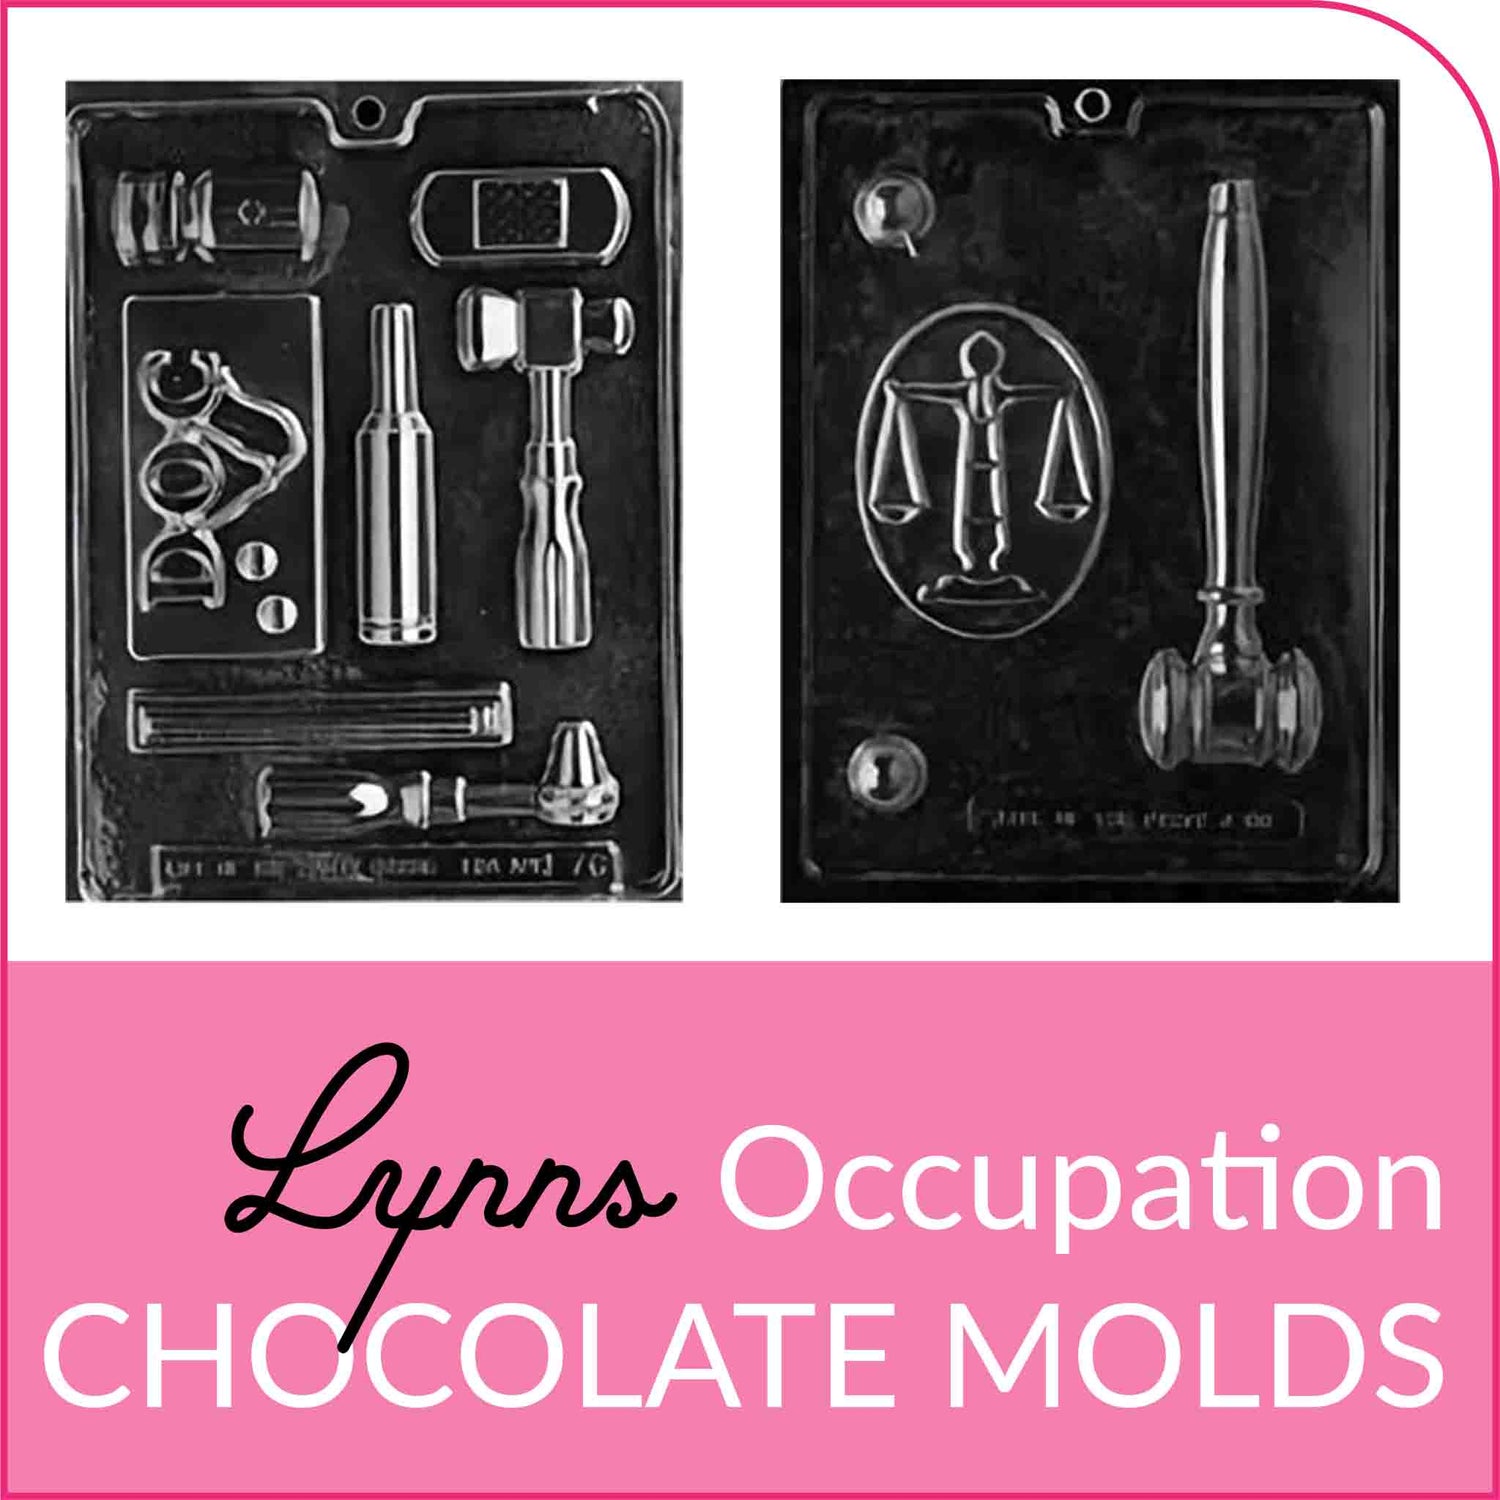 Shop Occupation Themed Chocolate Molds From Lynn's